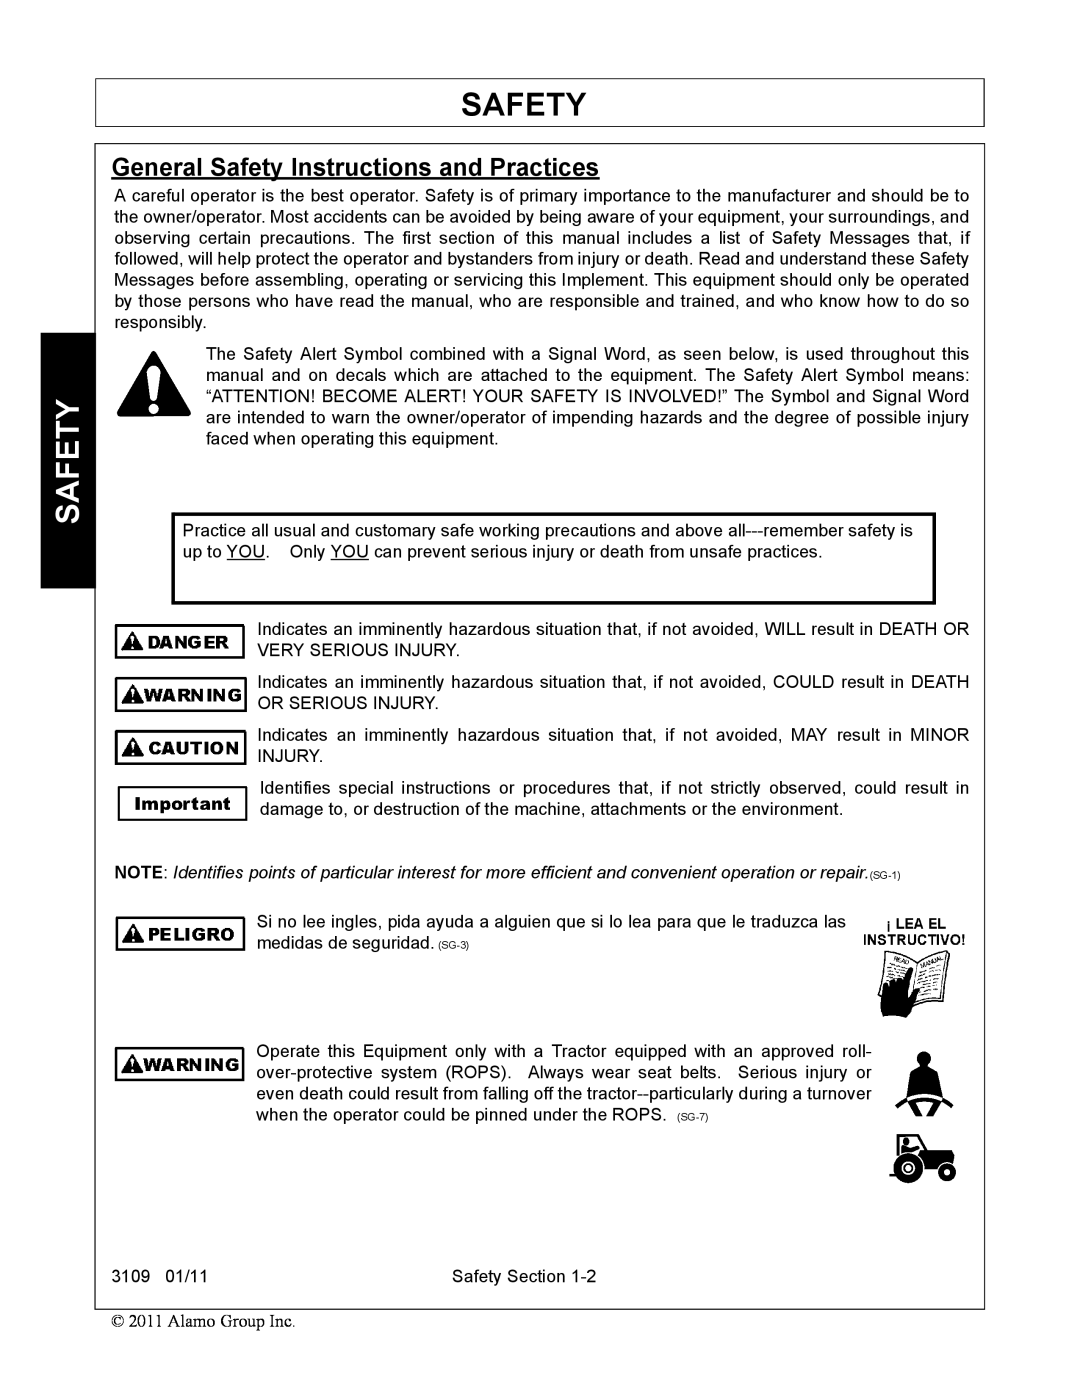 Alamo 3109 manual General Safety Instructions and Practices 